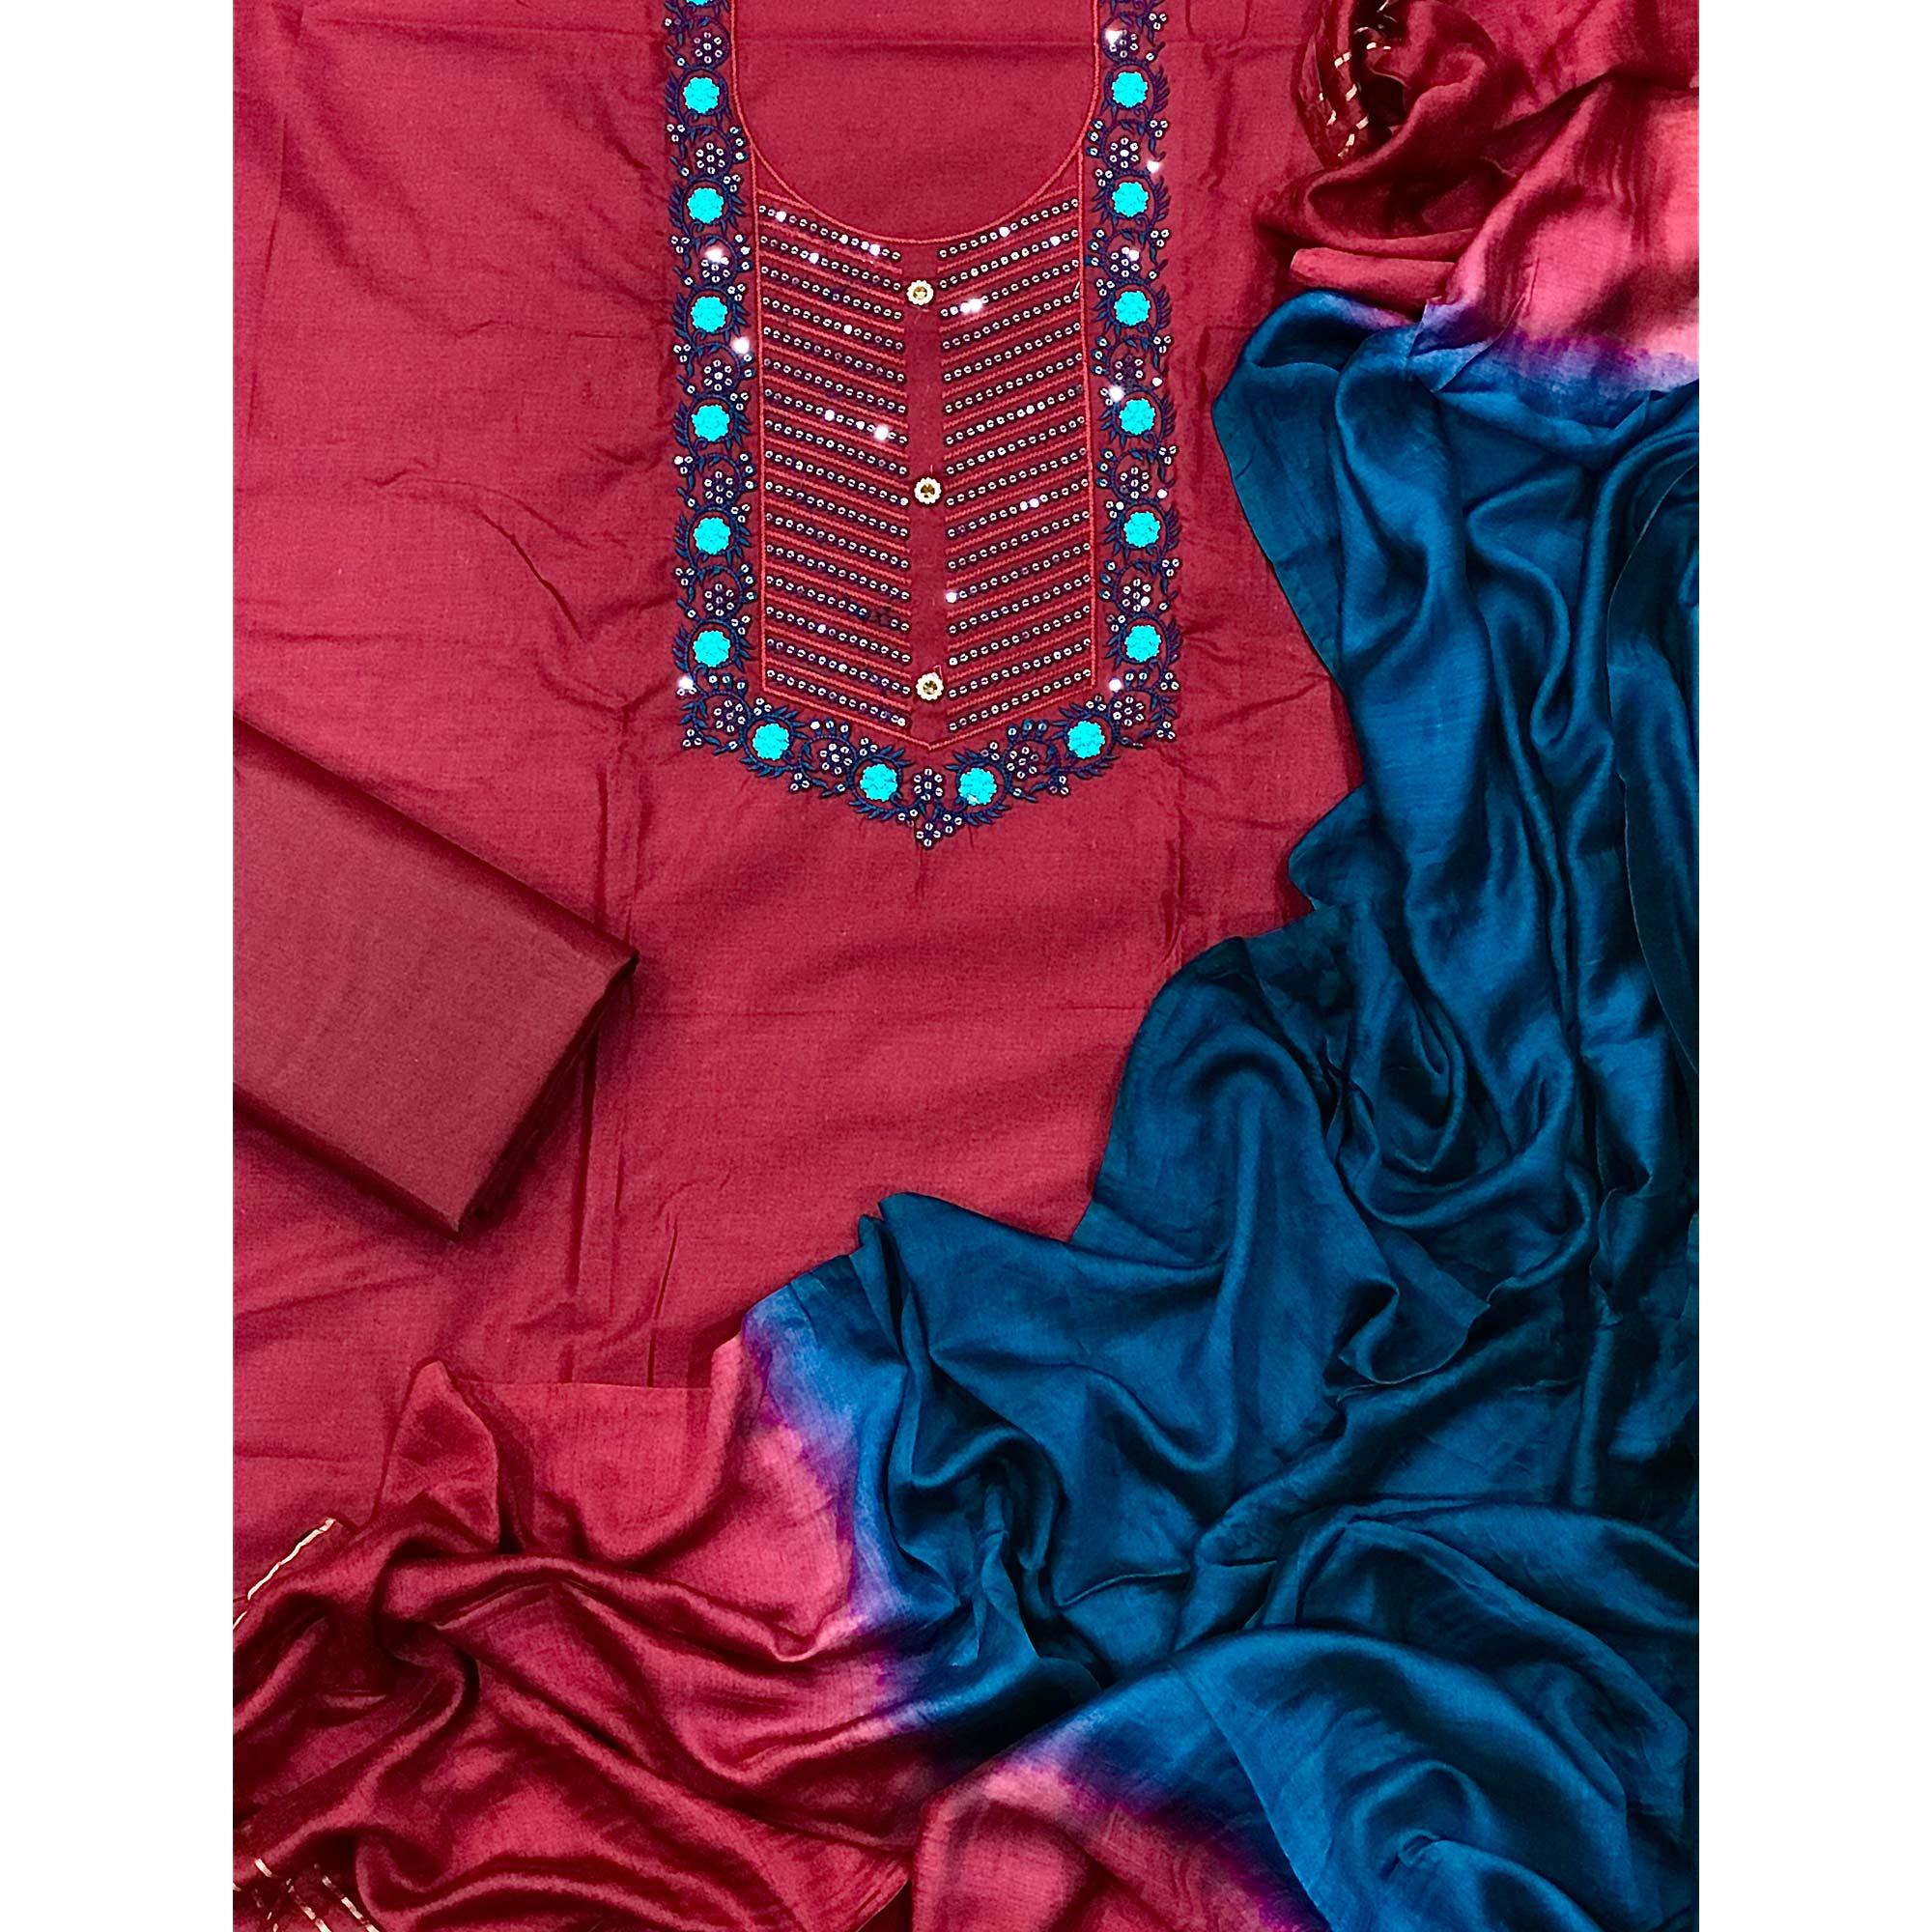 Maroon Embellished With Embroidered Cotton Blend Dress Material - Peachmode